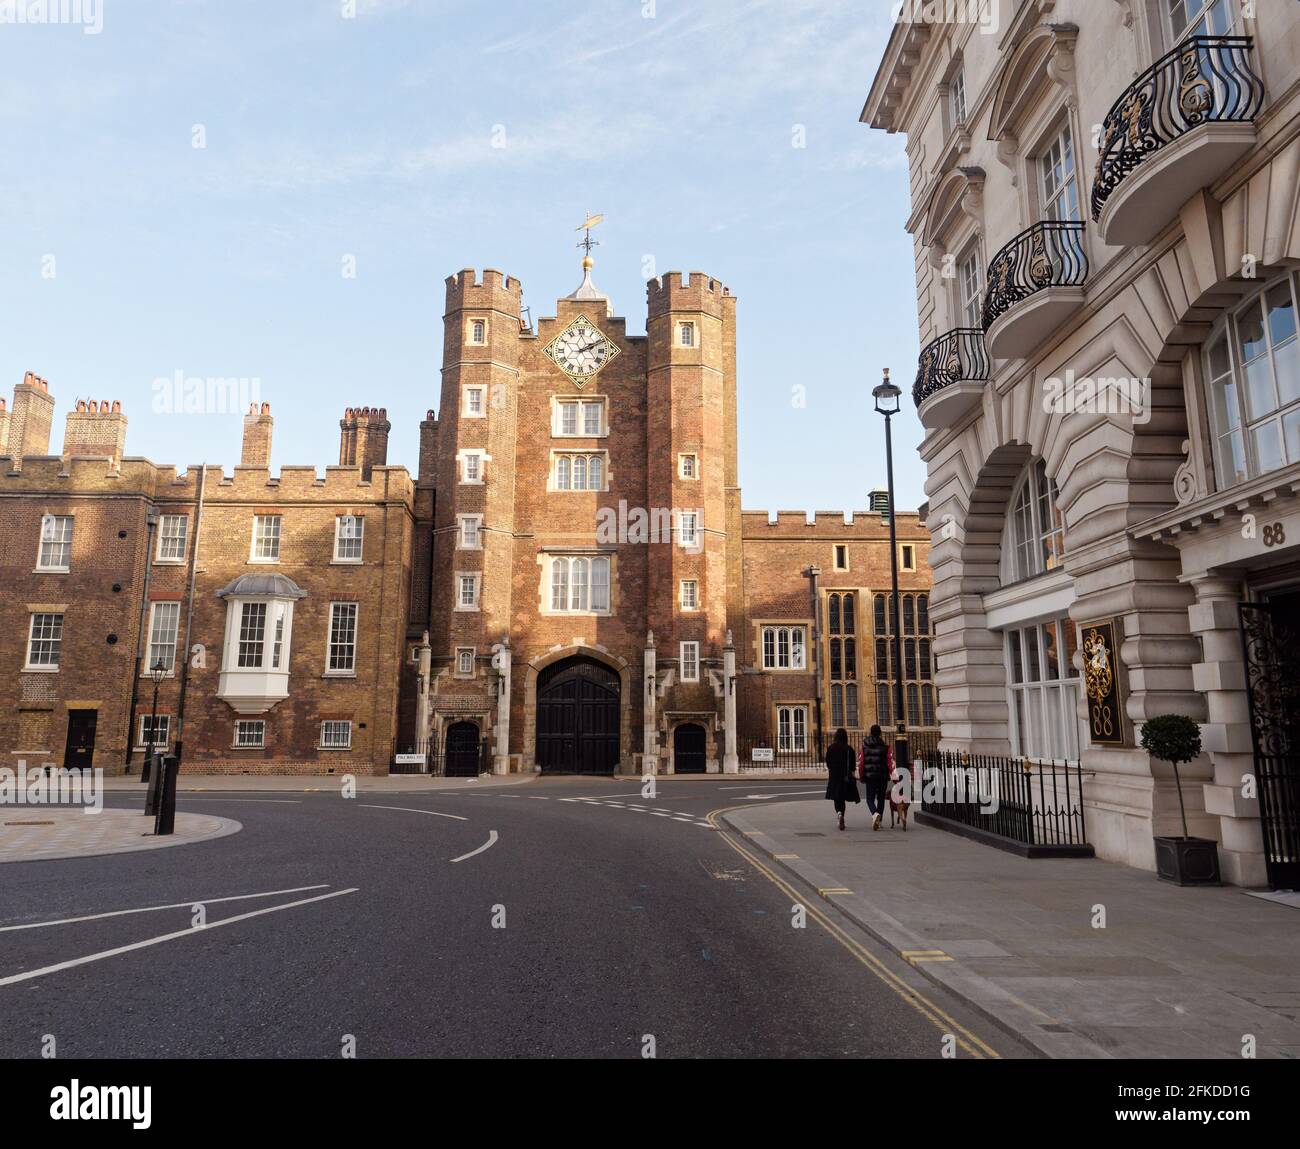 London, Greater London, England - Apr 24 2021: St James's Palace facade at the corner of Pall Mall and St James's Street. Stock Photo